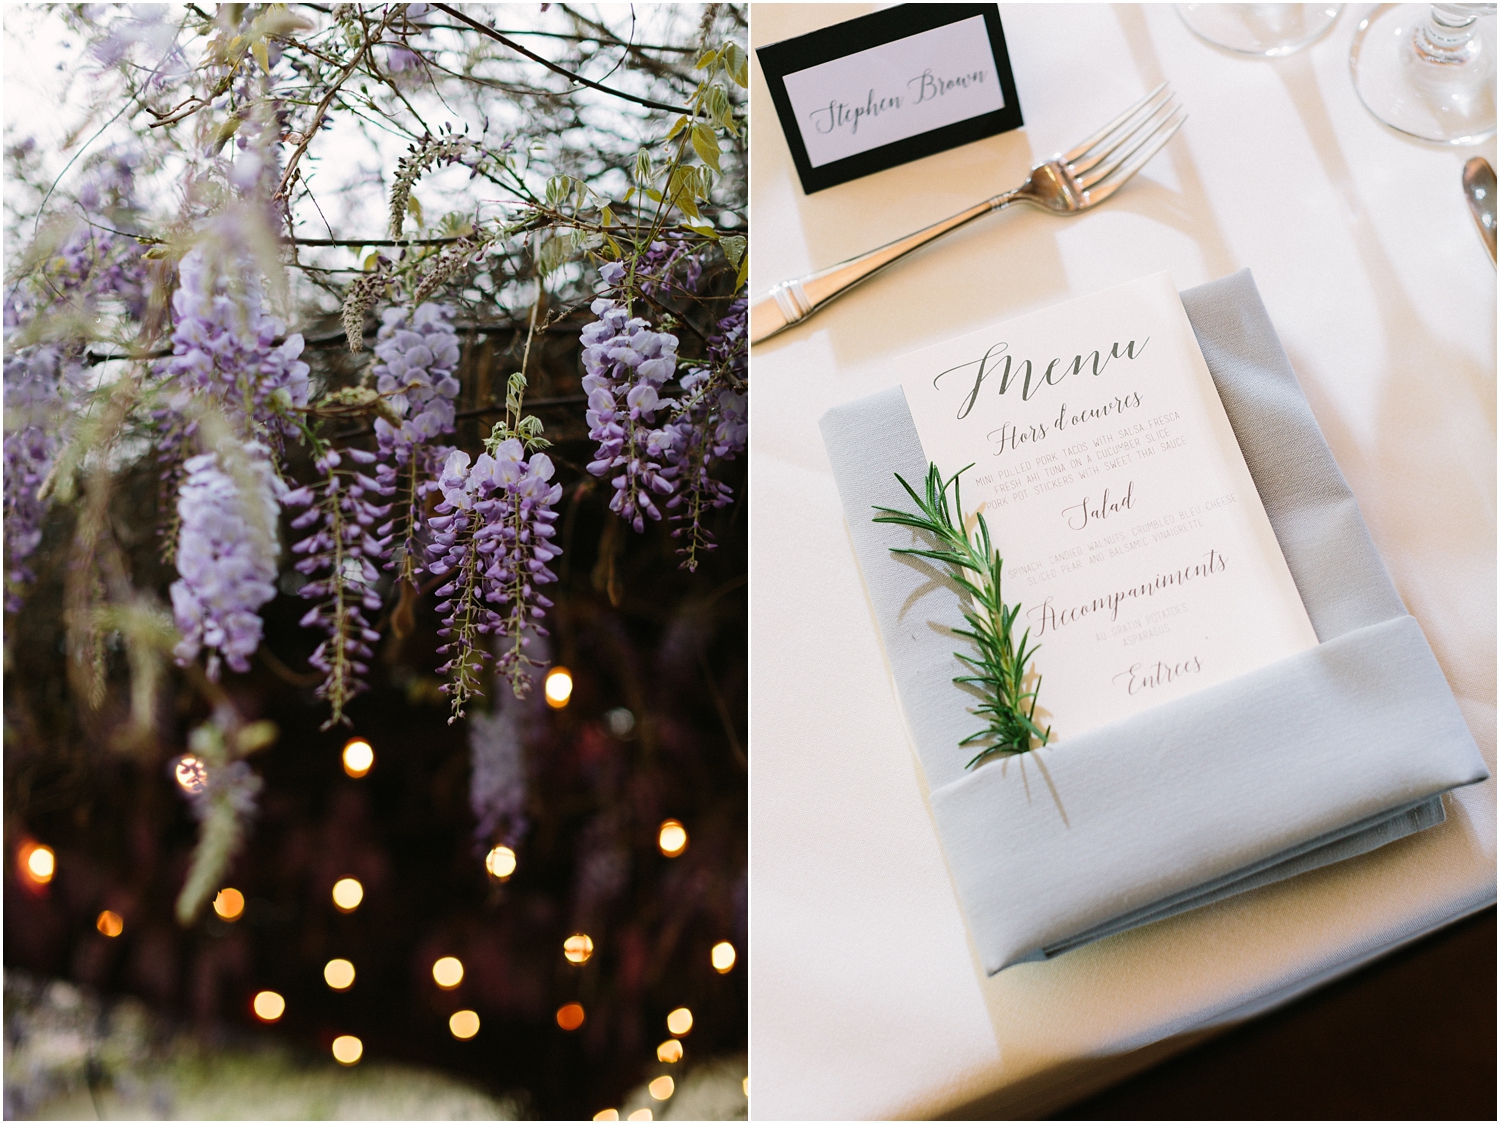 wedding details of wedding reception or rosemary and lavender menu cards